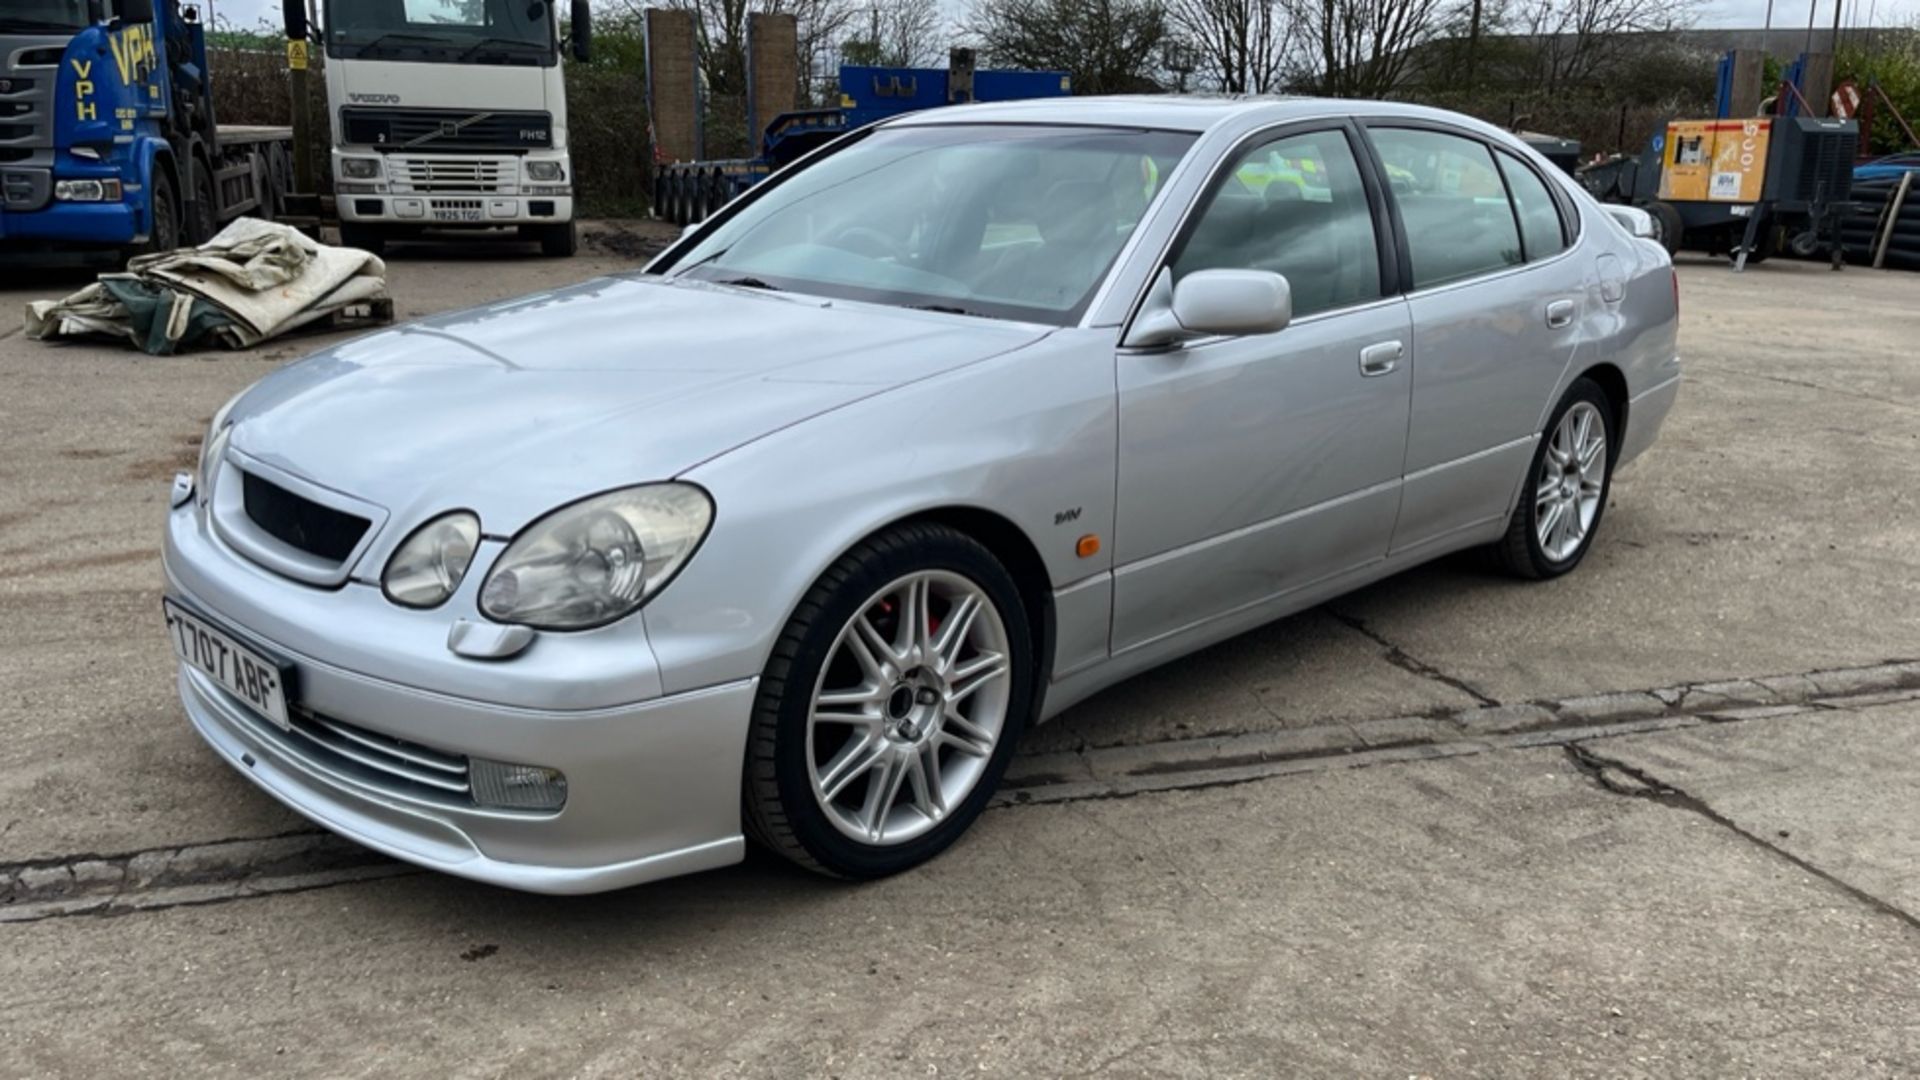 LEXUS GS300 3.0 SPORT Car Automatic (YEAR 1999) - Image 2 of 18